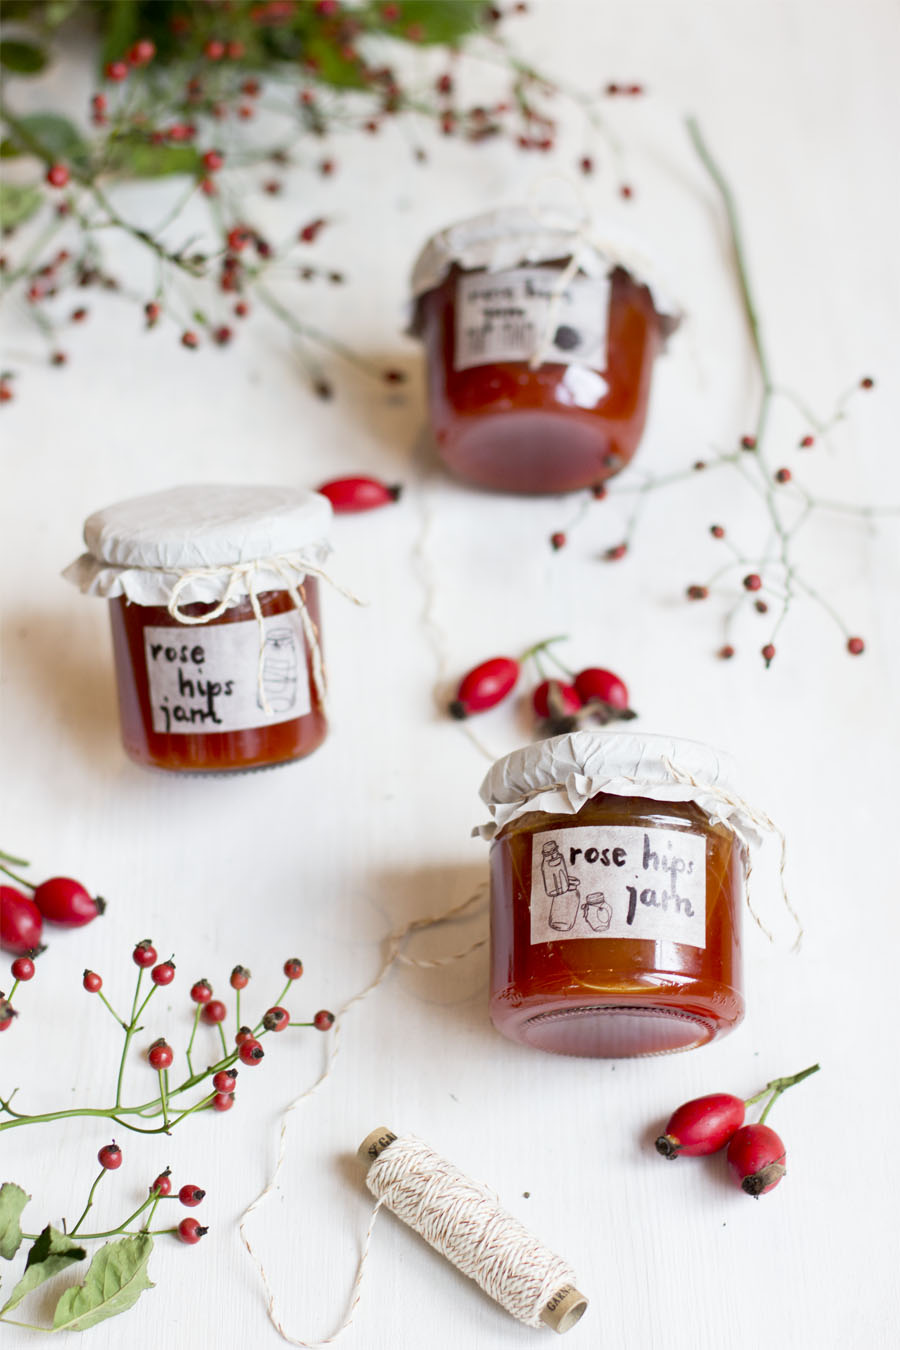 Rose hips jam recipe | LOOK WHAT I MADE ...